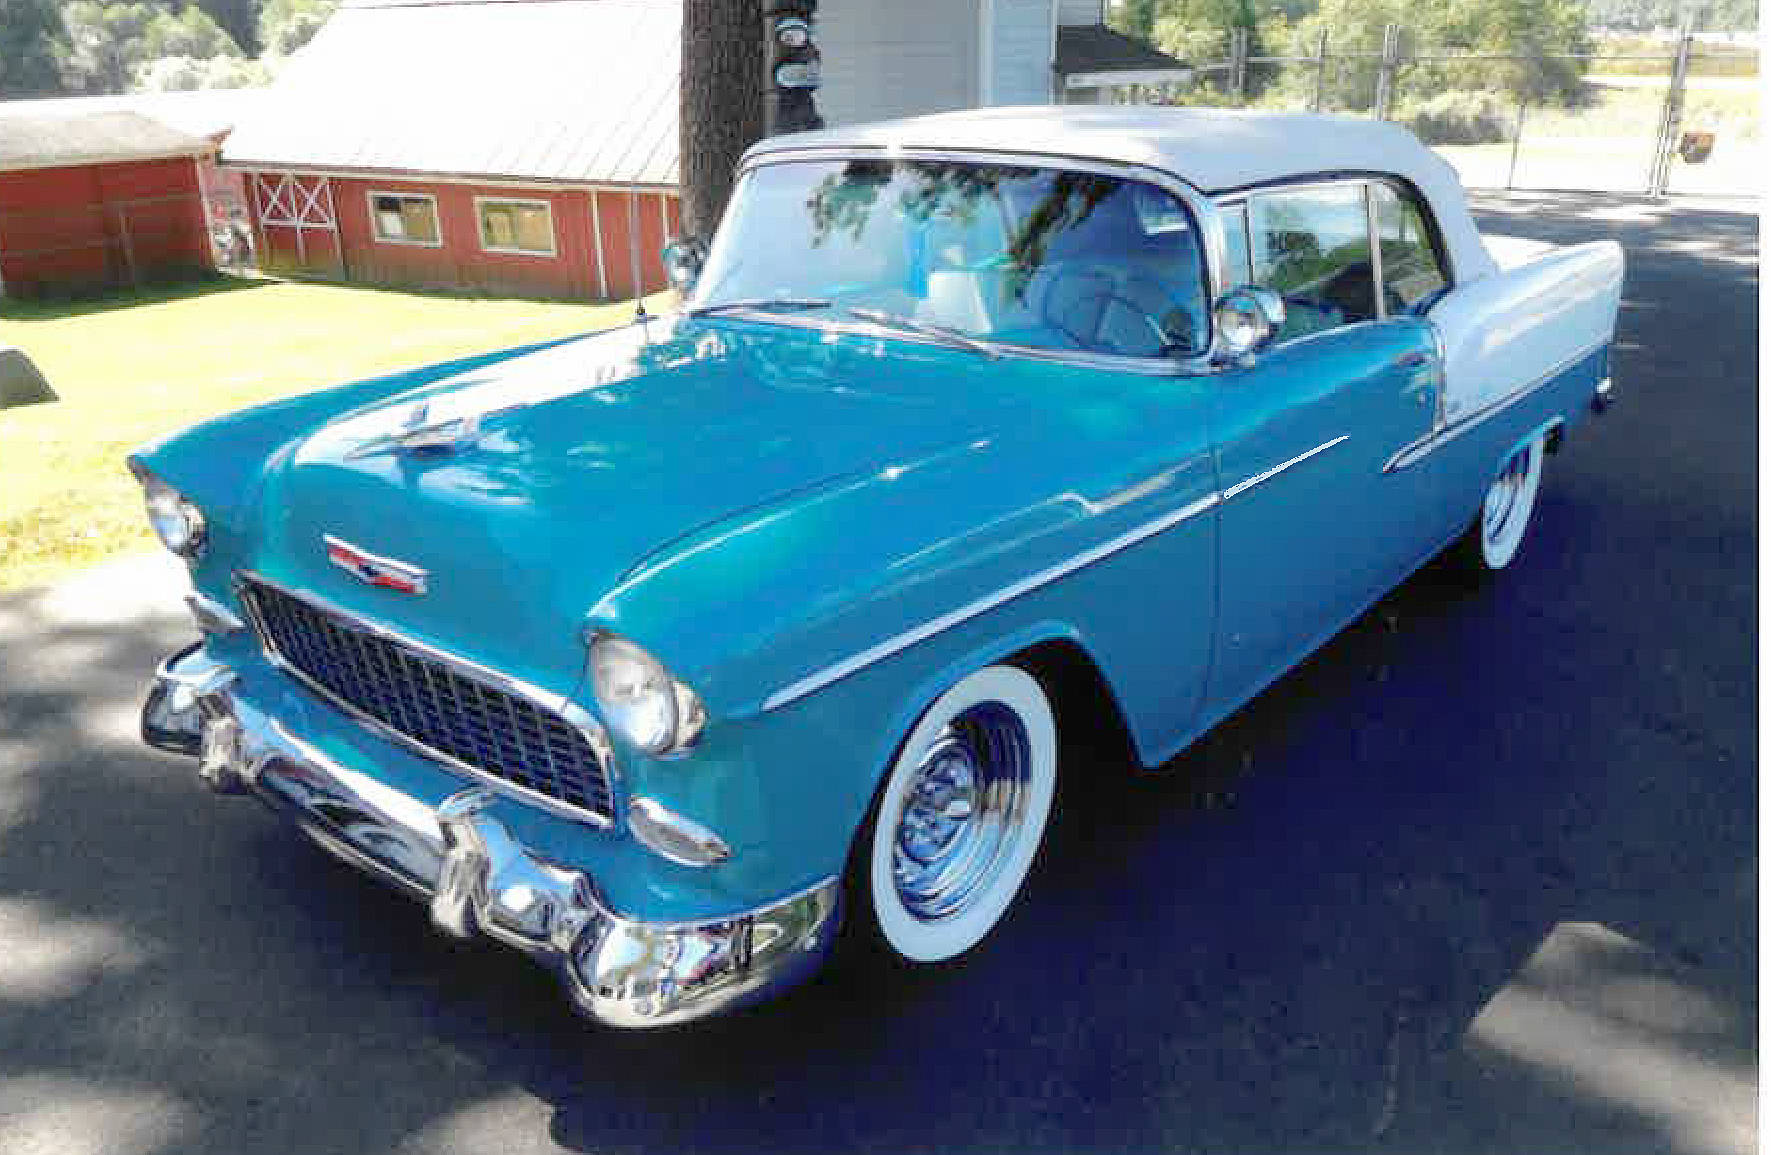 Larry Stokes photo                                This beautiful 1955 Chevrolet Bel-Aire convertible is owned by Larry and Shirley Stokes. It will be one of the featured cars on display at the CRUZ Car Show.